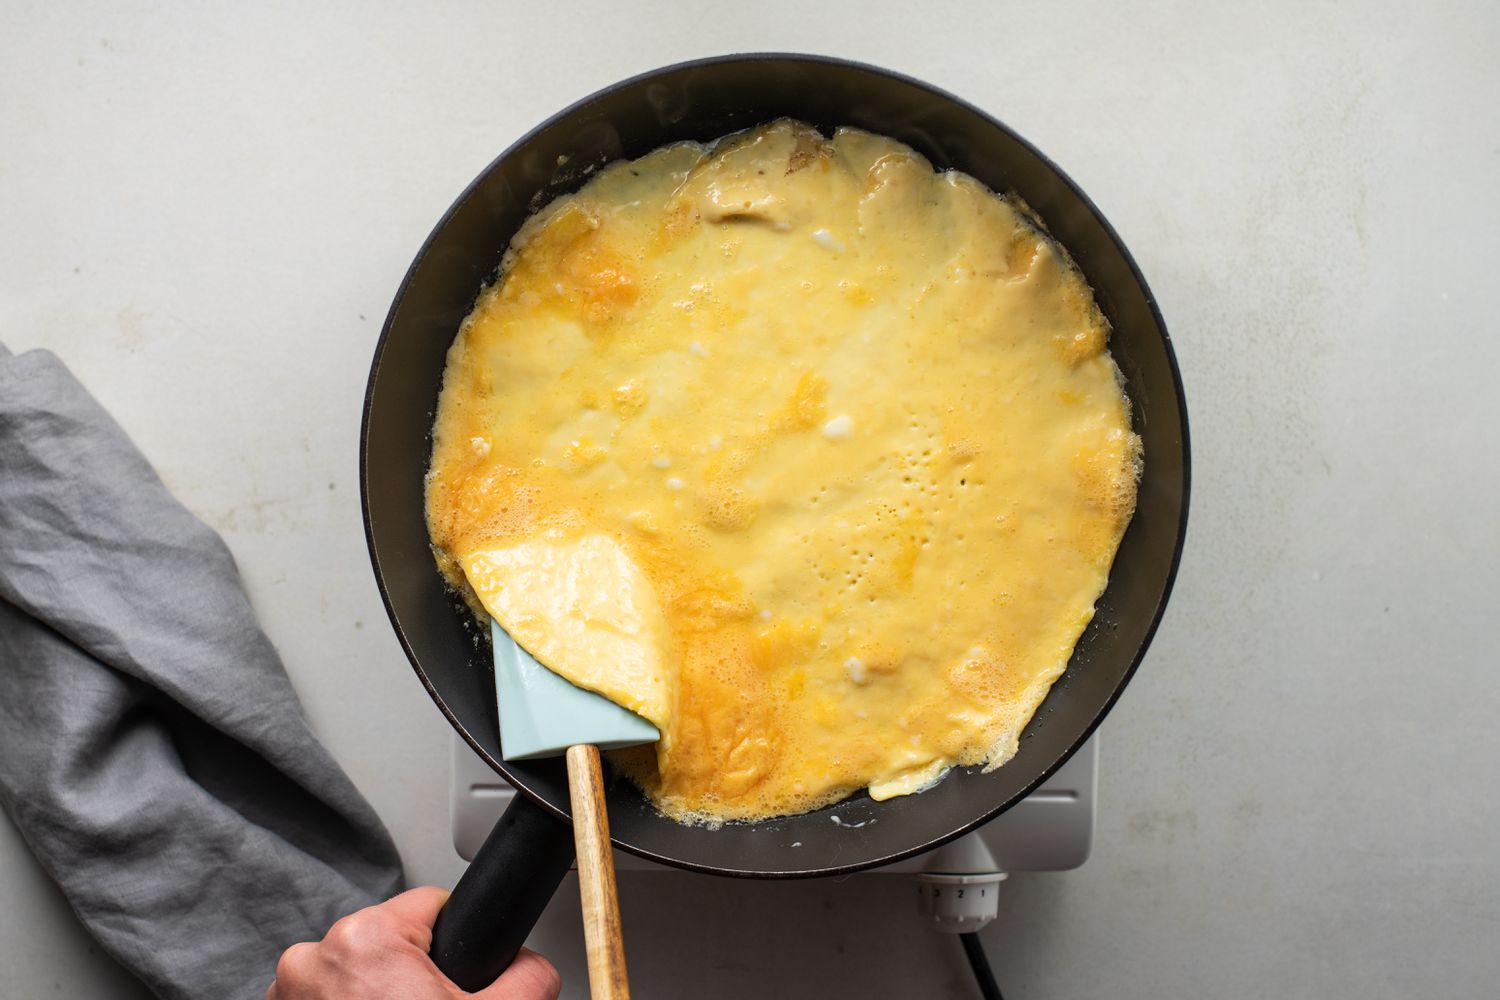 Edge of omelet in the frying pan being lifted with a spatula